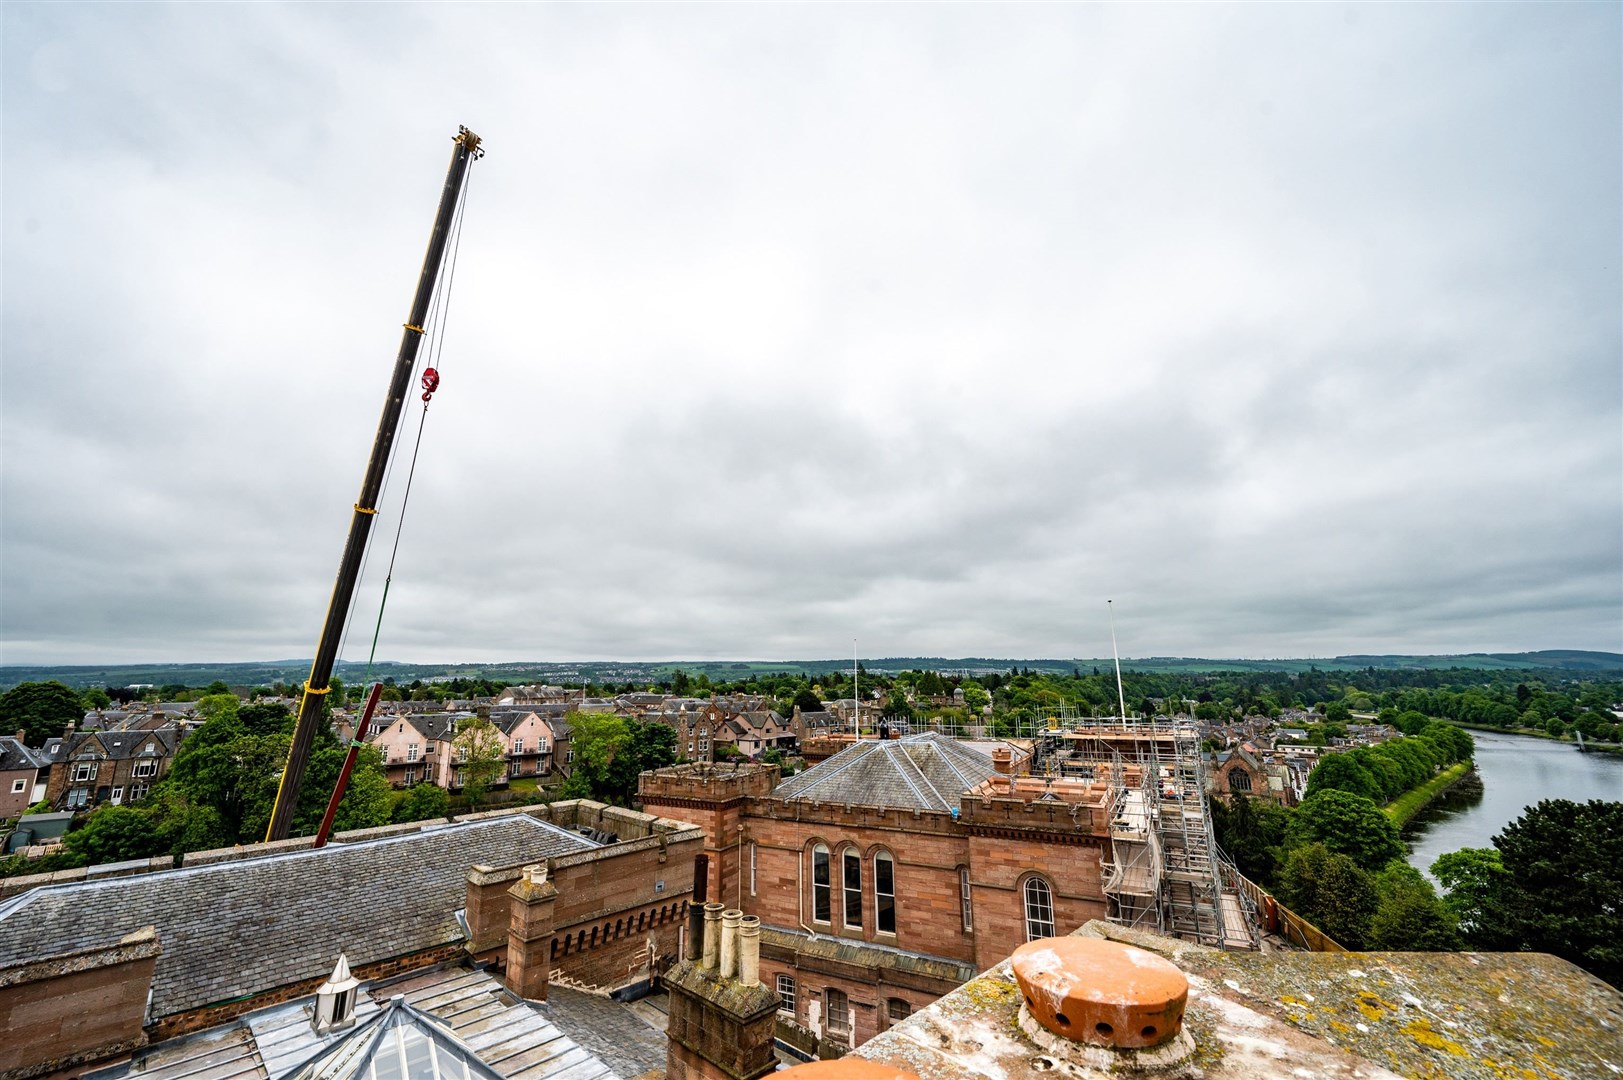 The first deployement of a crane at Inverness Castle as the new visitor experience takes shape.